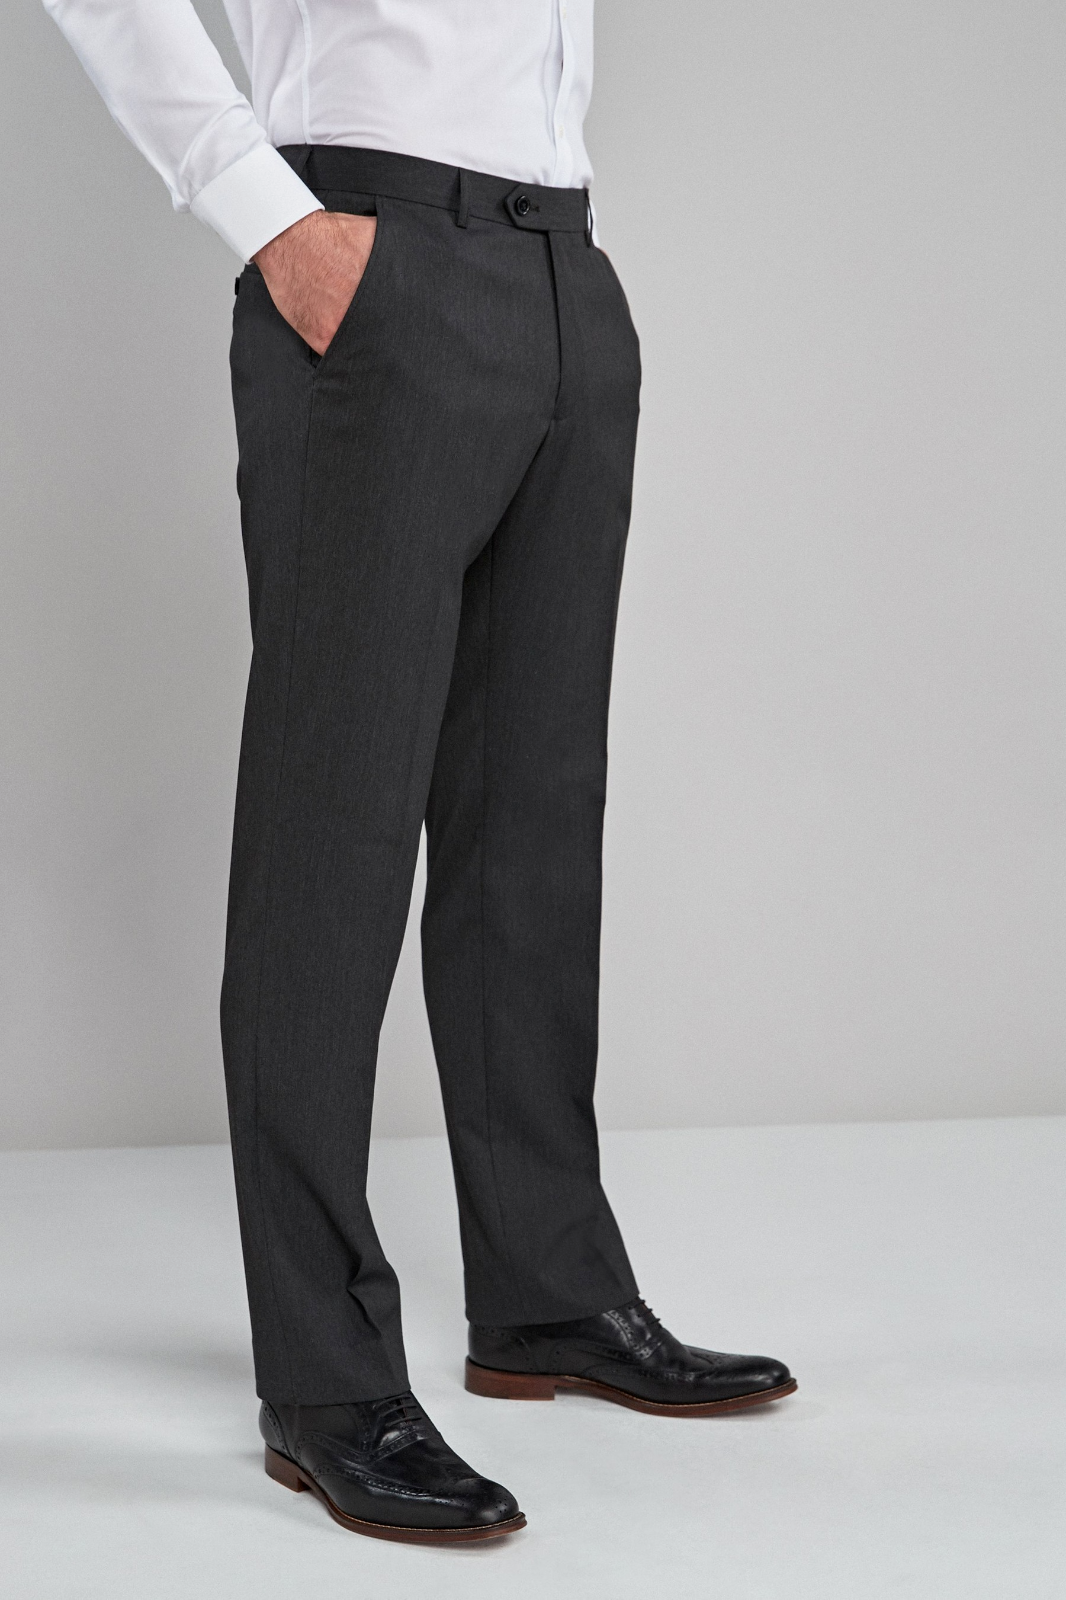 Charcoal Grey Slim Fit Trousers - Brand New